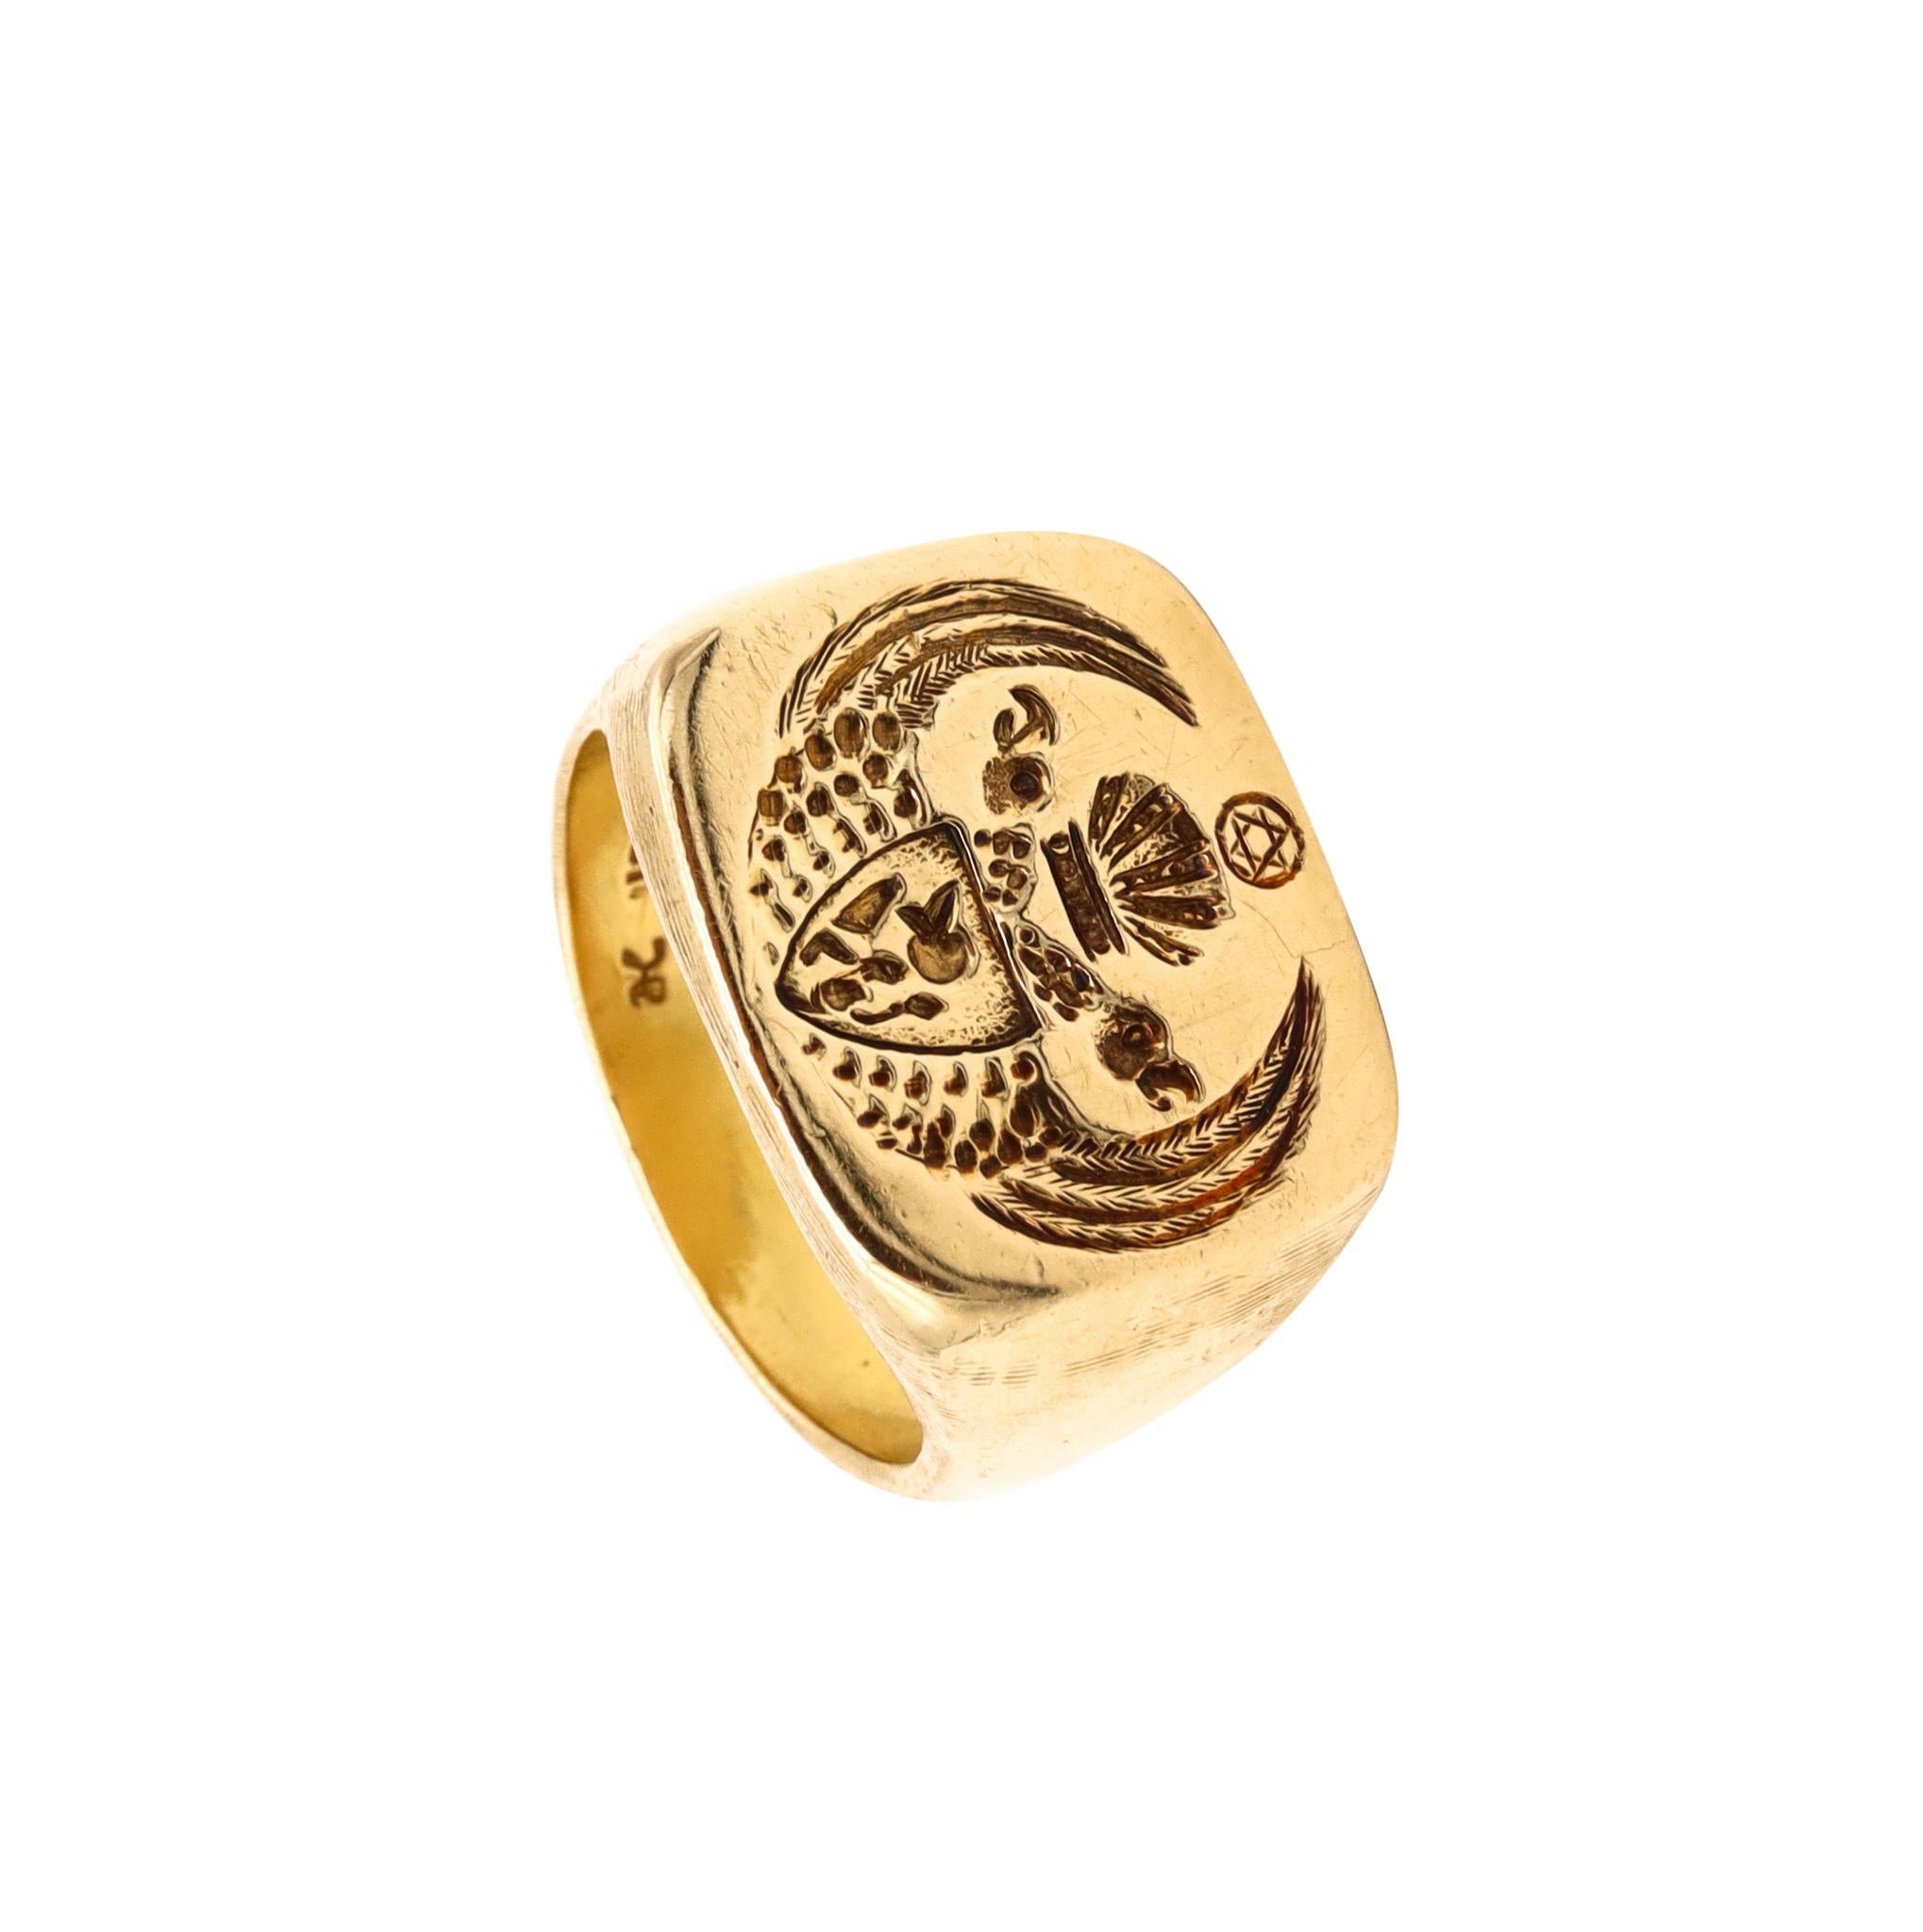 Scottish rite Supreme council Judaica-Masonic signet ring.

Rare signet ring of the Masonic Scottish rite, from the late 19th century, circa 1890. Crafted in solid massive yellow gold of 18 karats, with high polished surfaces

The rectangular part